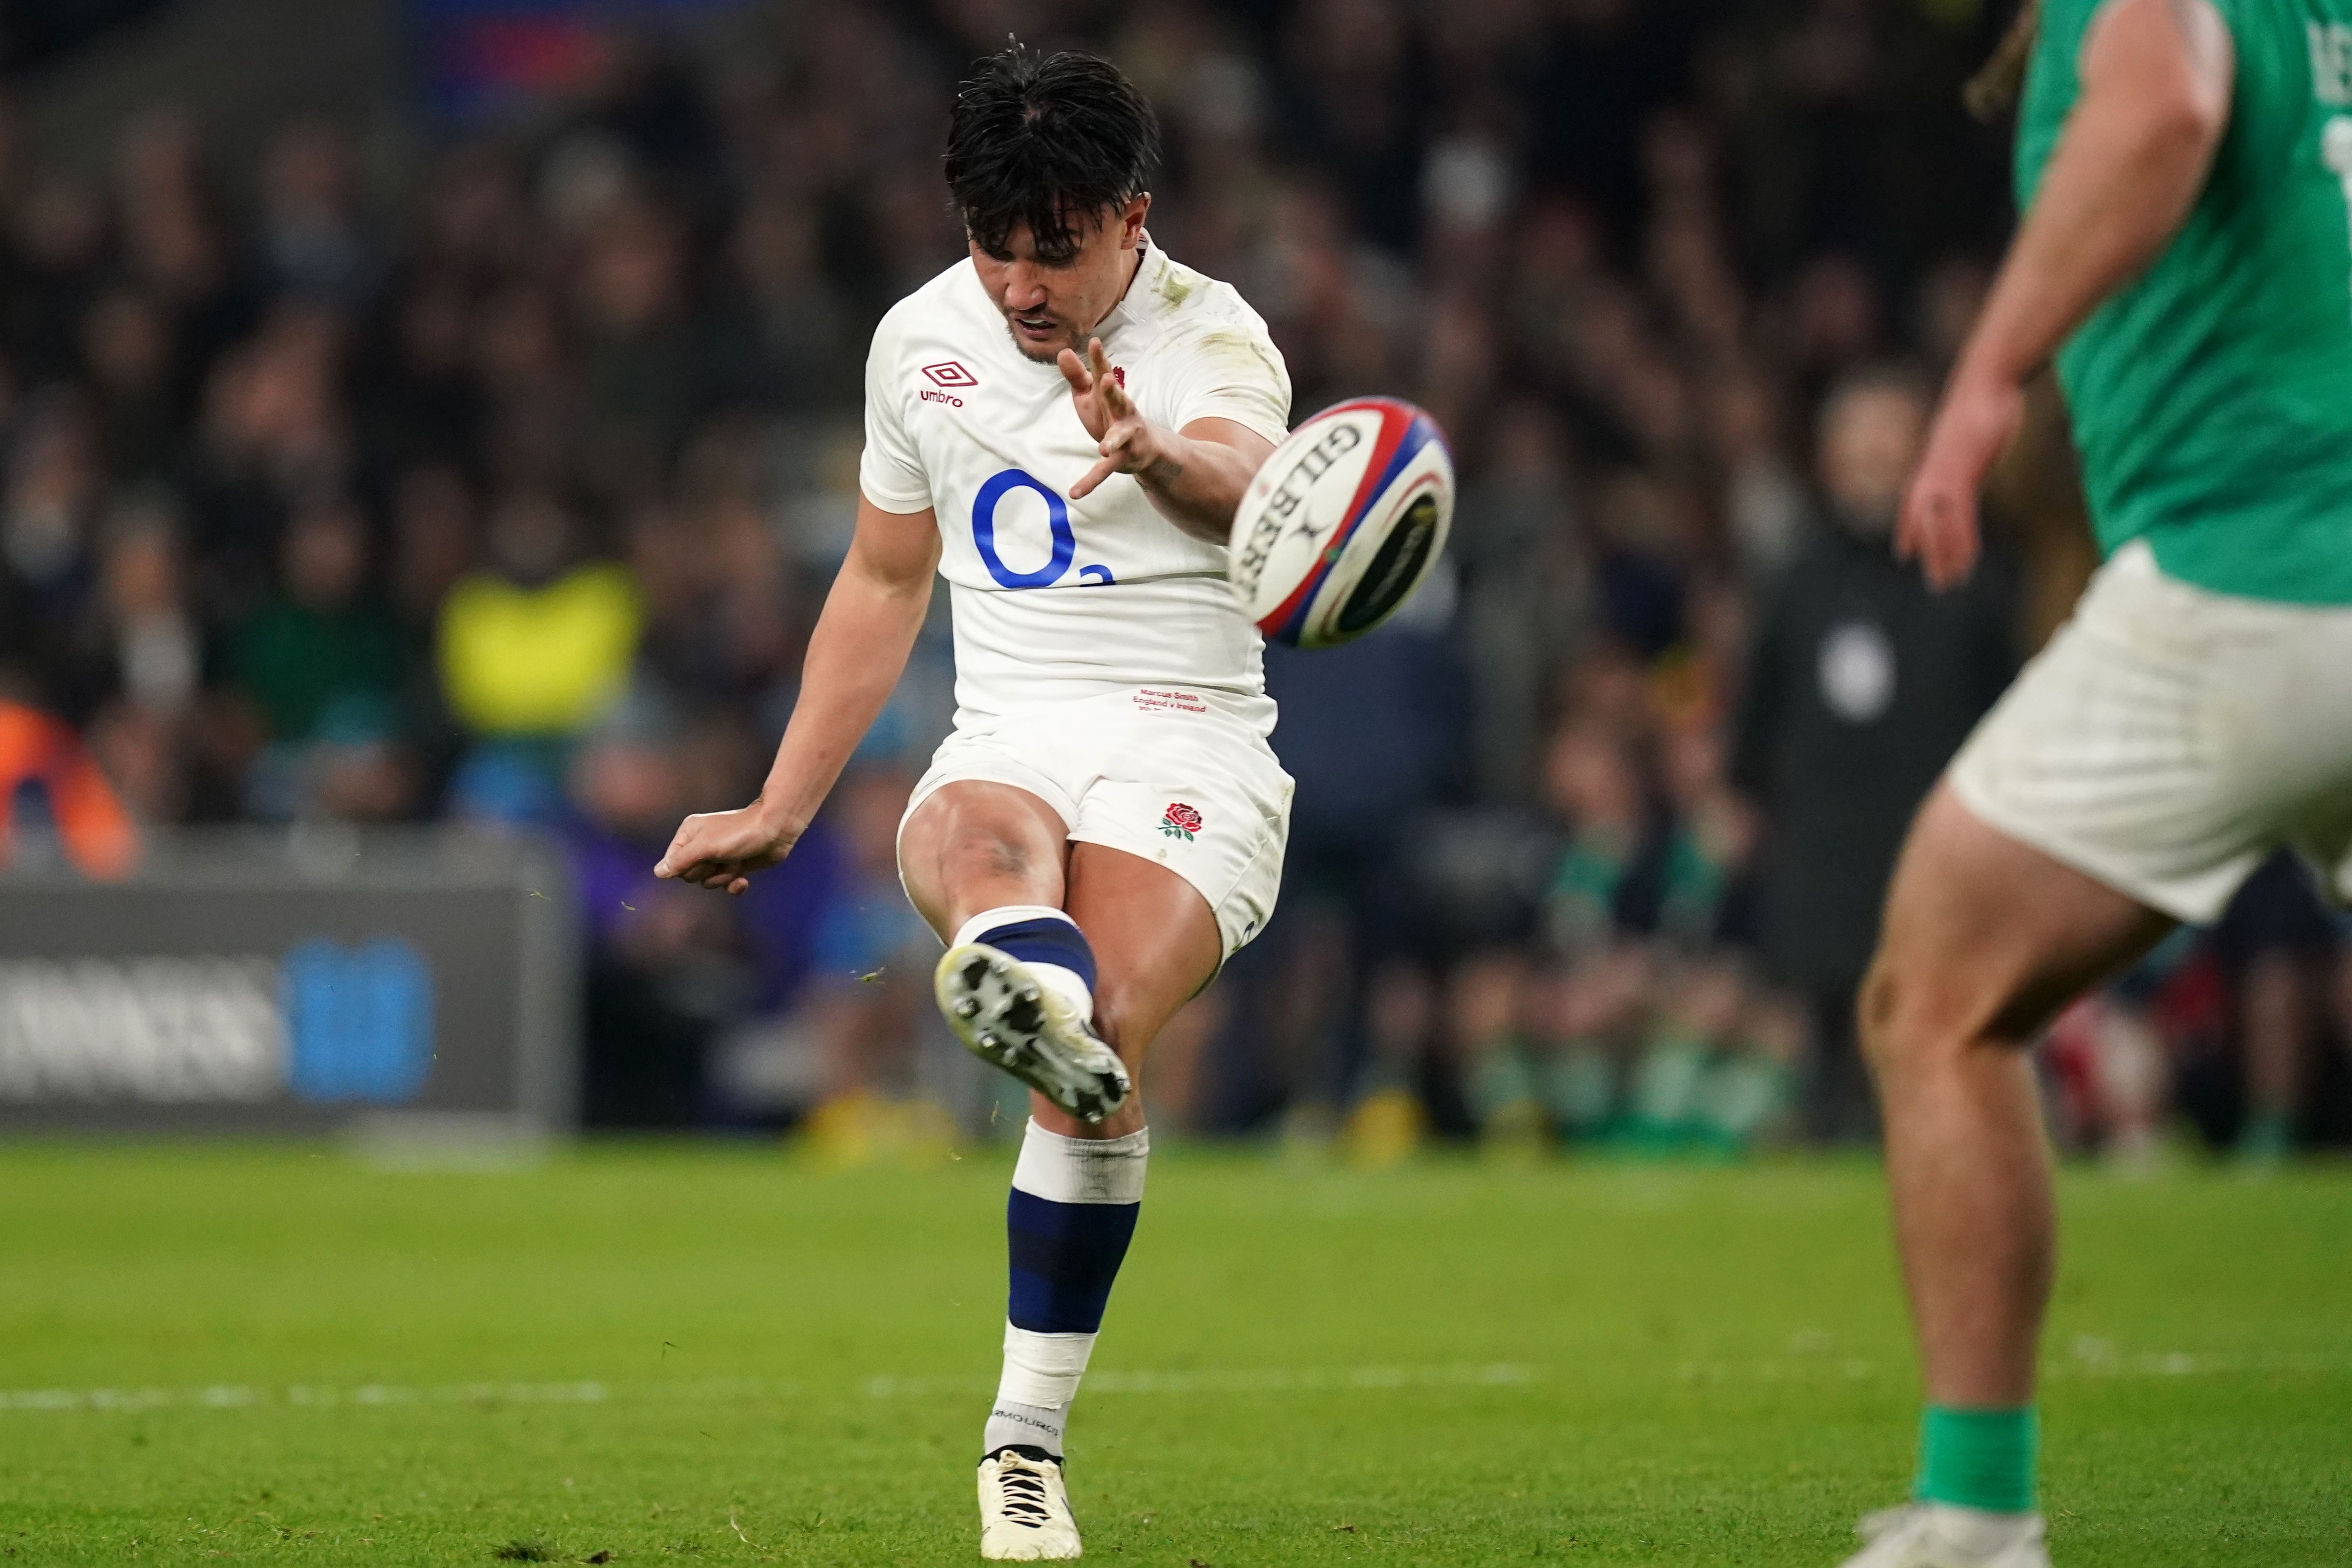 Marcus Smith’s drop goal secured victory for England